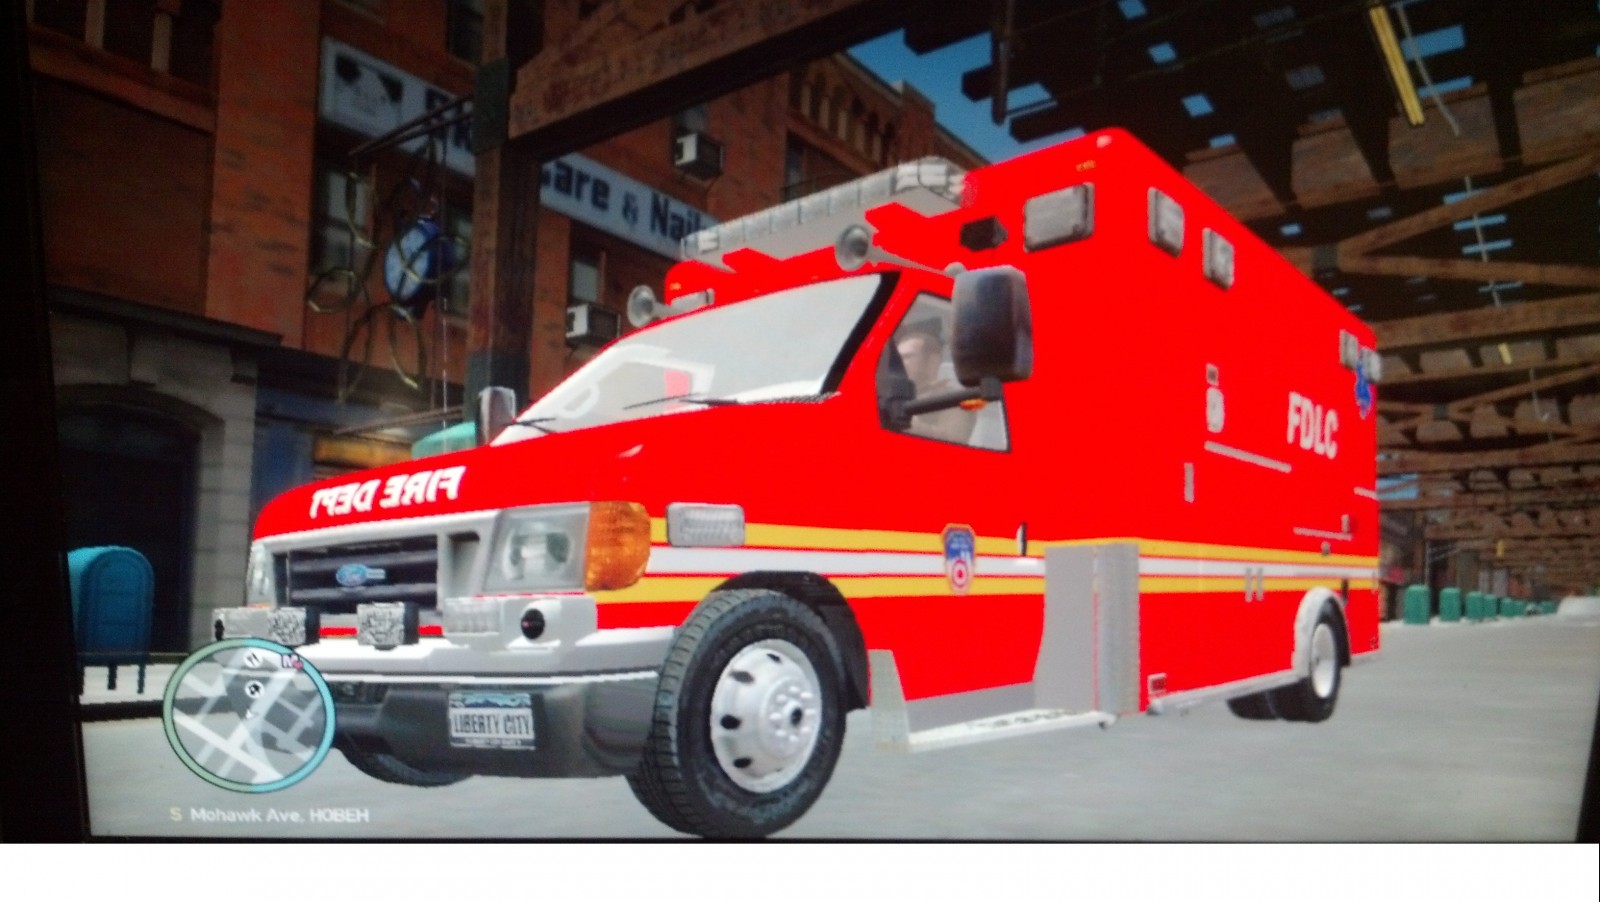 Liberty City Emergency Services skins